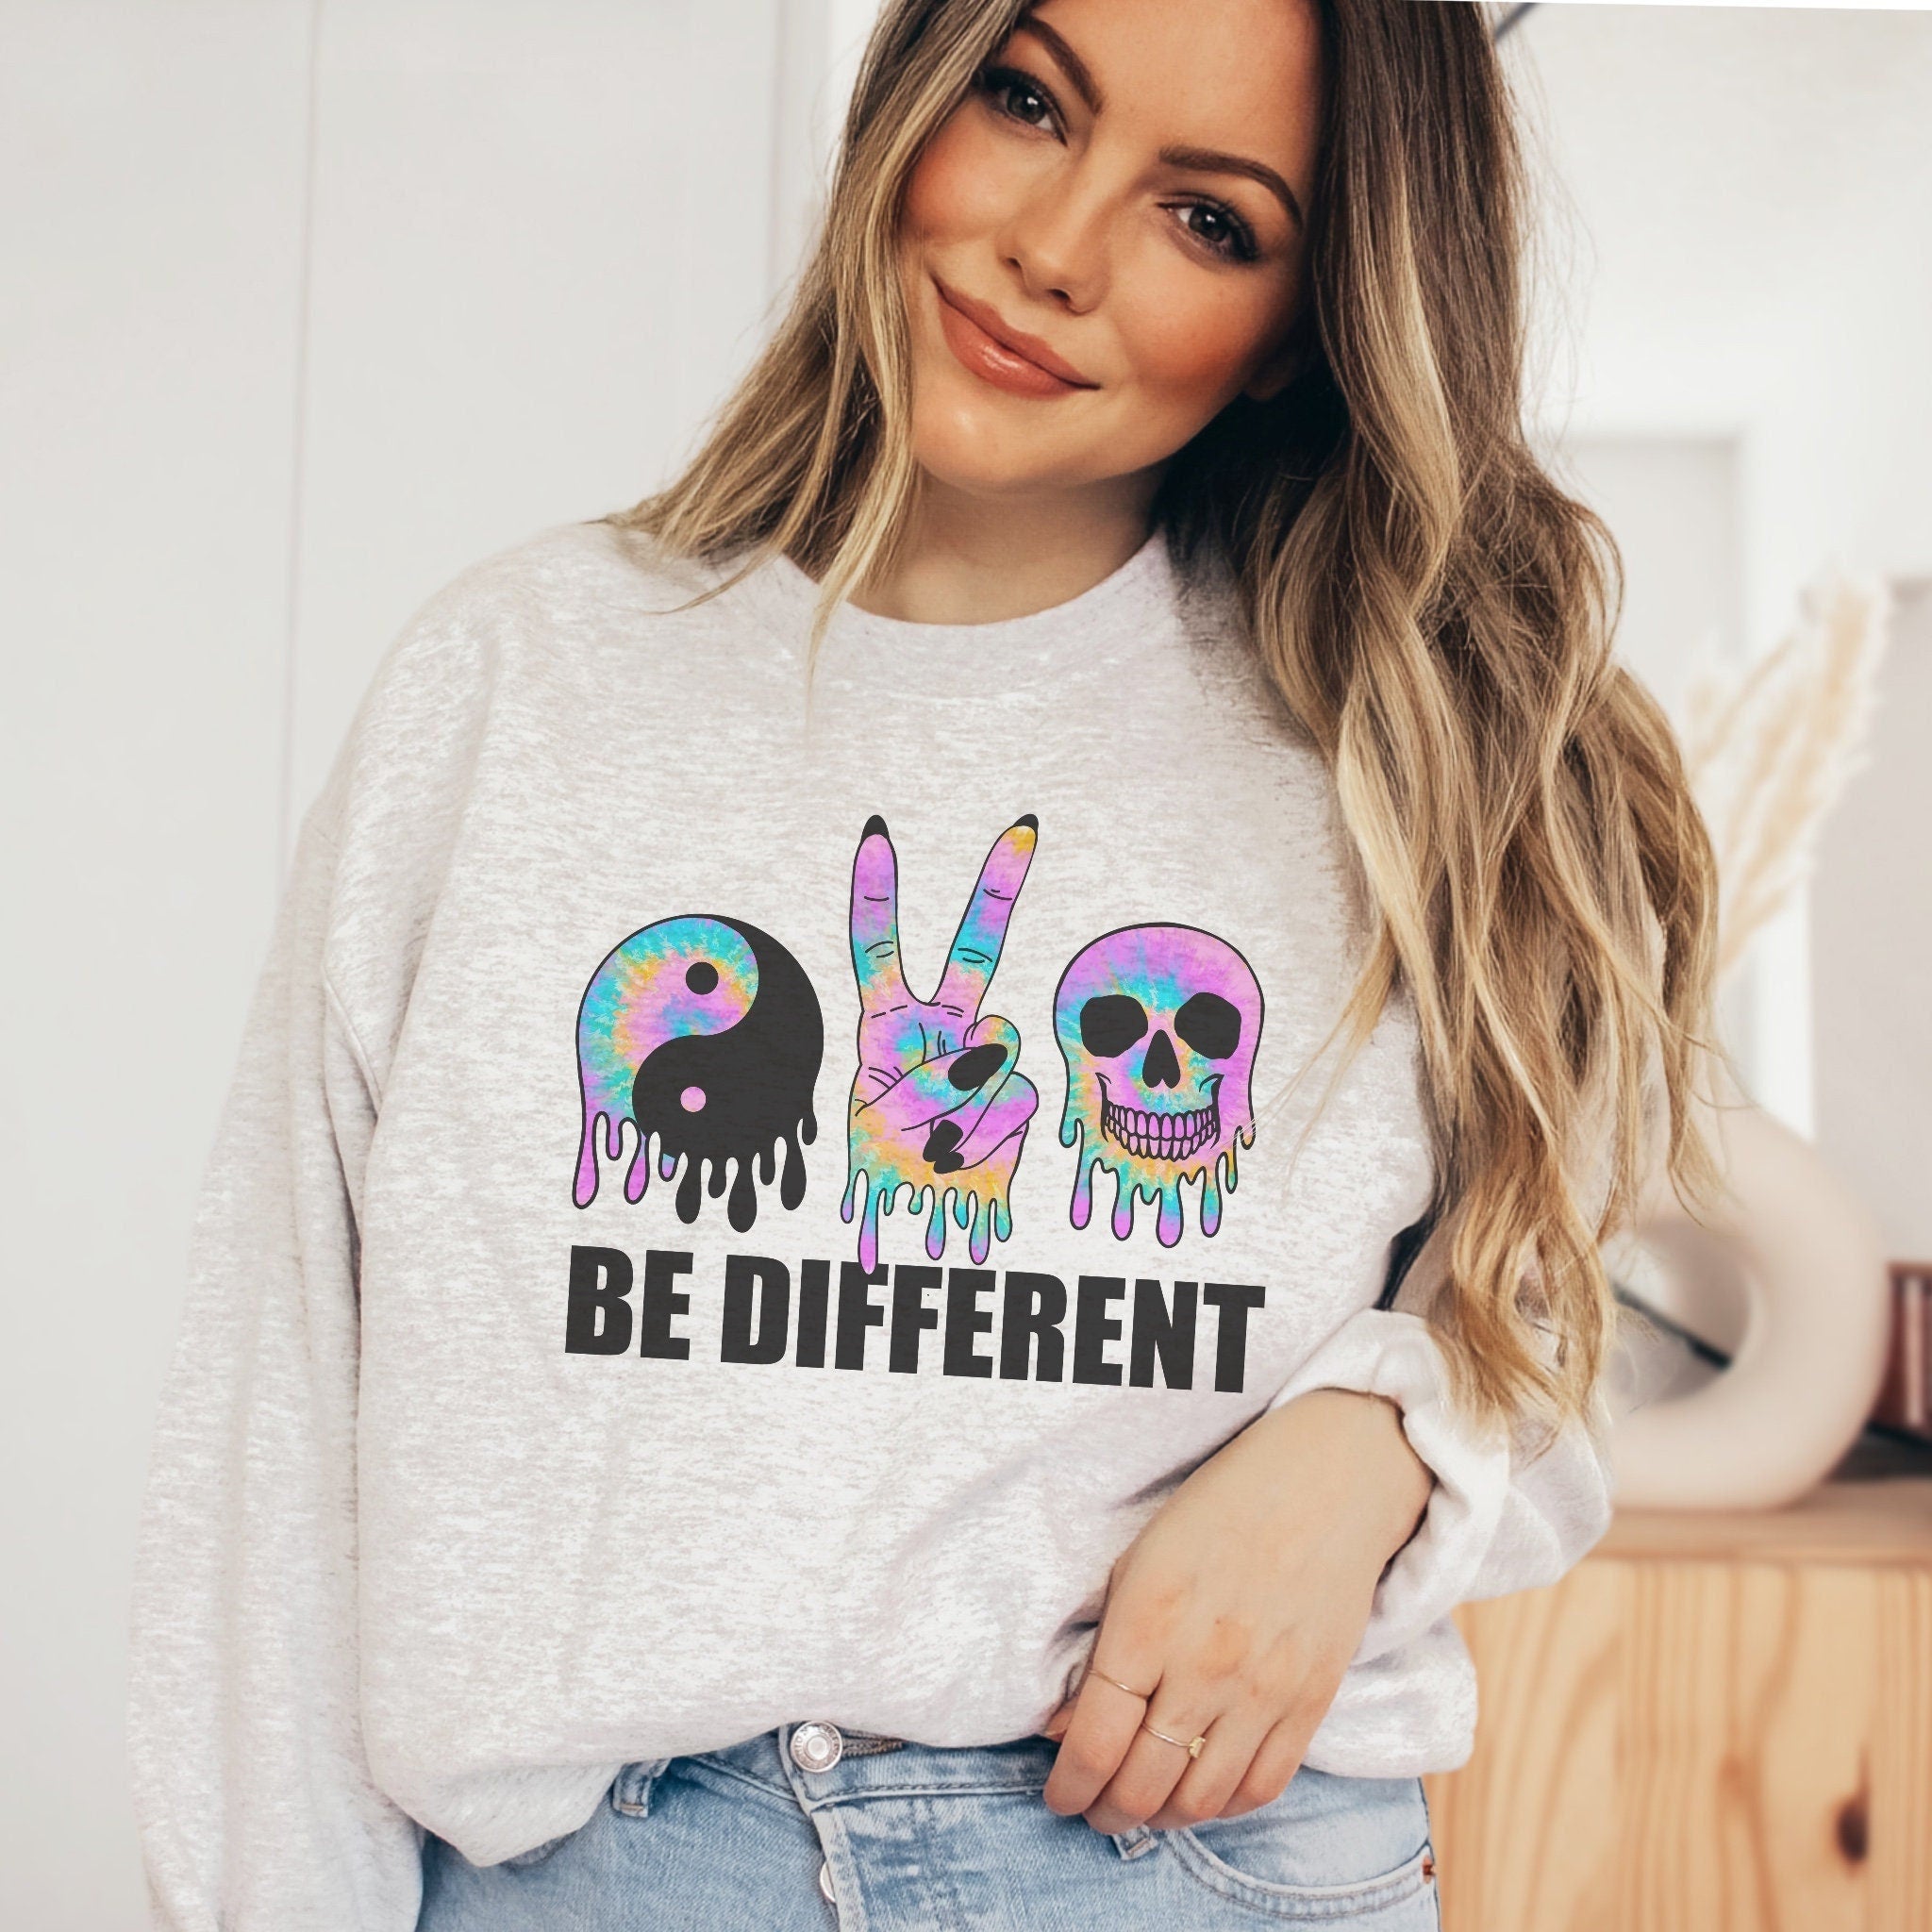 Be Different Tie Dye Crewneck Sweatshirt | Peace Sign, Skull, Yin Yang | Tie Dye Sweater | Gift for Her